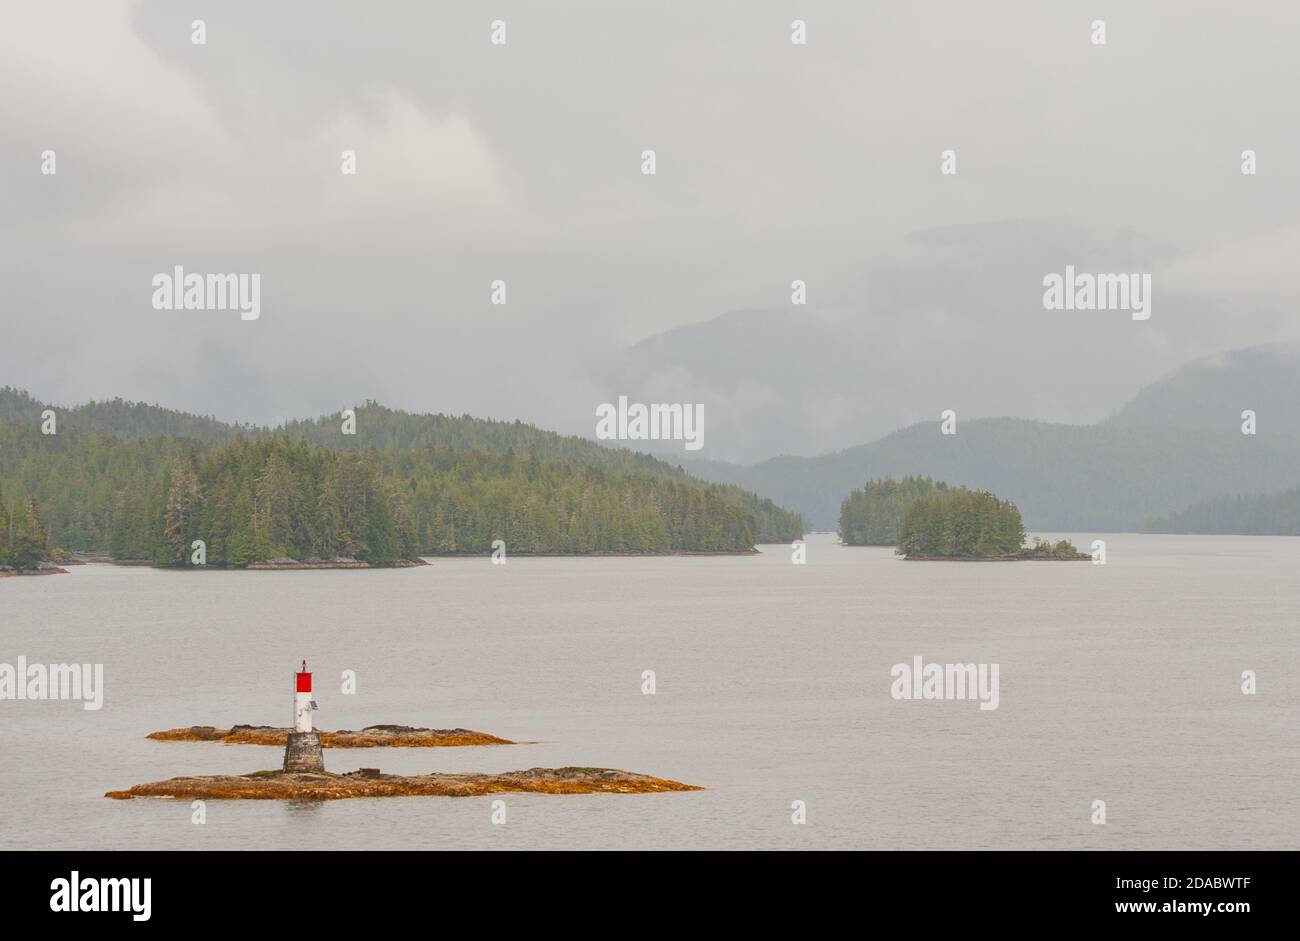 Scenic view from the ferry to the Inside Passage off Vancouver Island. In foreground a rock with a beacon. In background wooded islands and mountains. Stock Photo